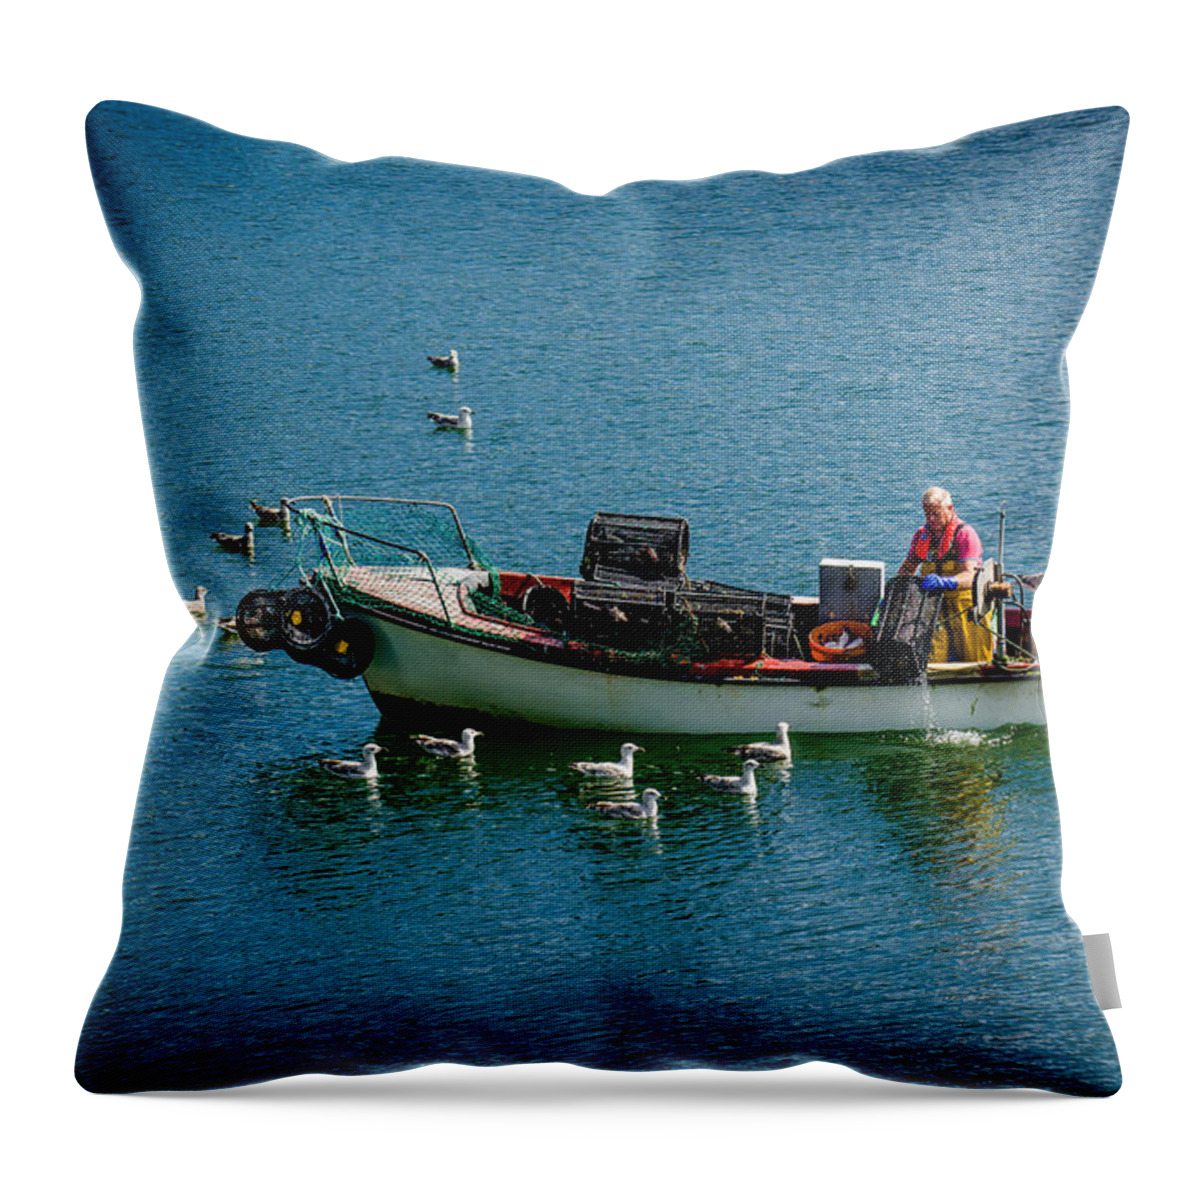 Boat Throw Pillow featuring the photograph Fisherman with Boat and Seagulls by Andreas Berthold